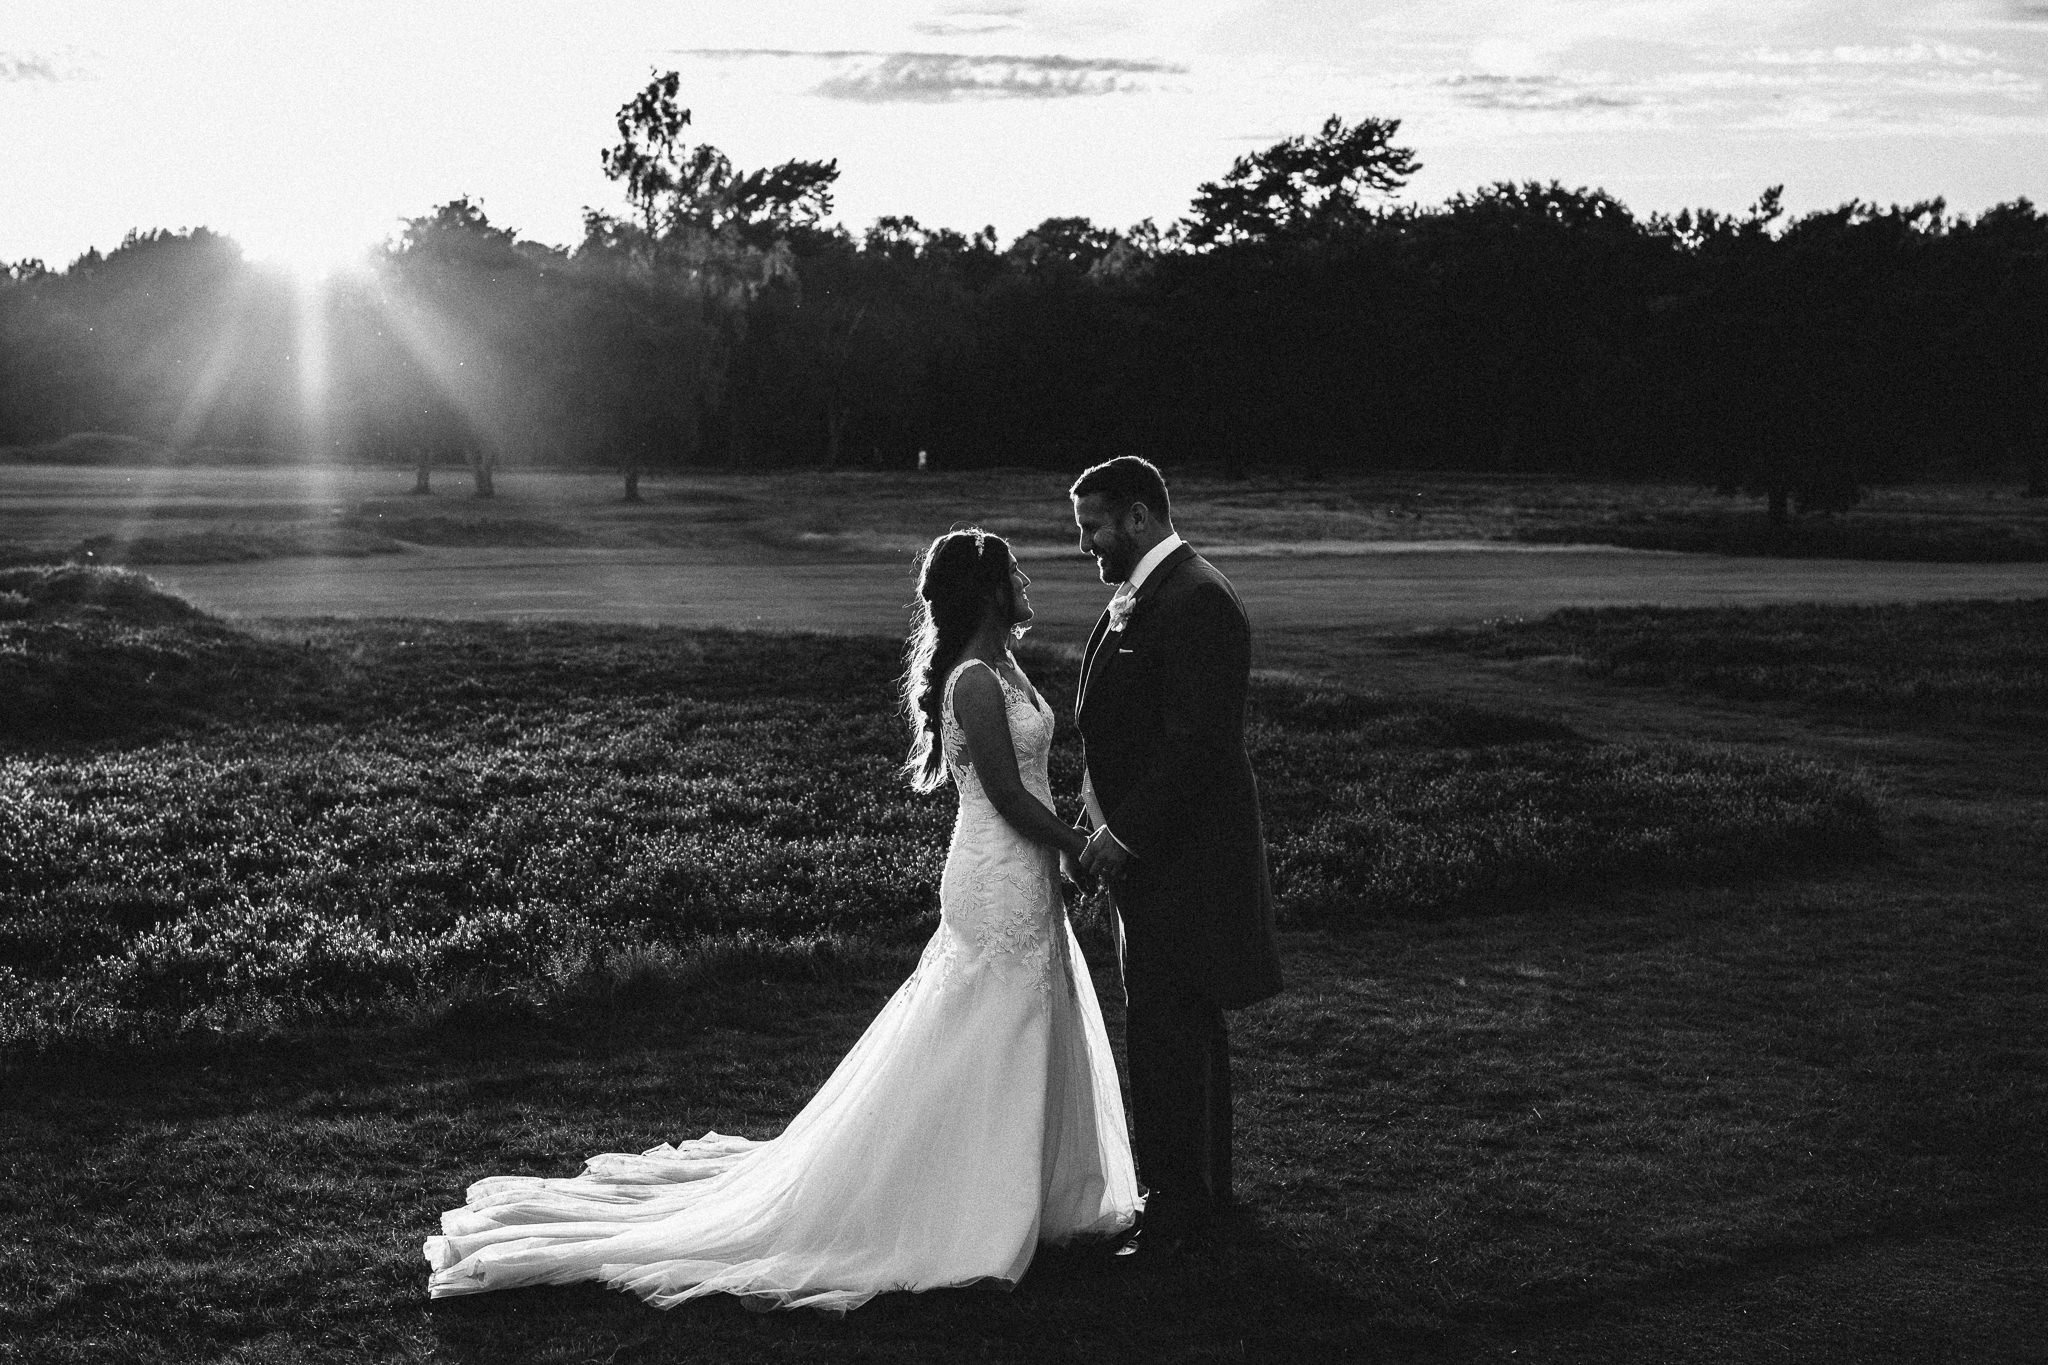  Bride and Groom looking at each other as the sun sets in the background on the golf course  at Walton Heath Golf Club Surrey 